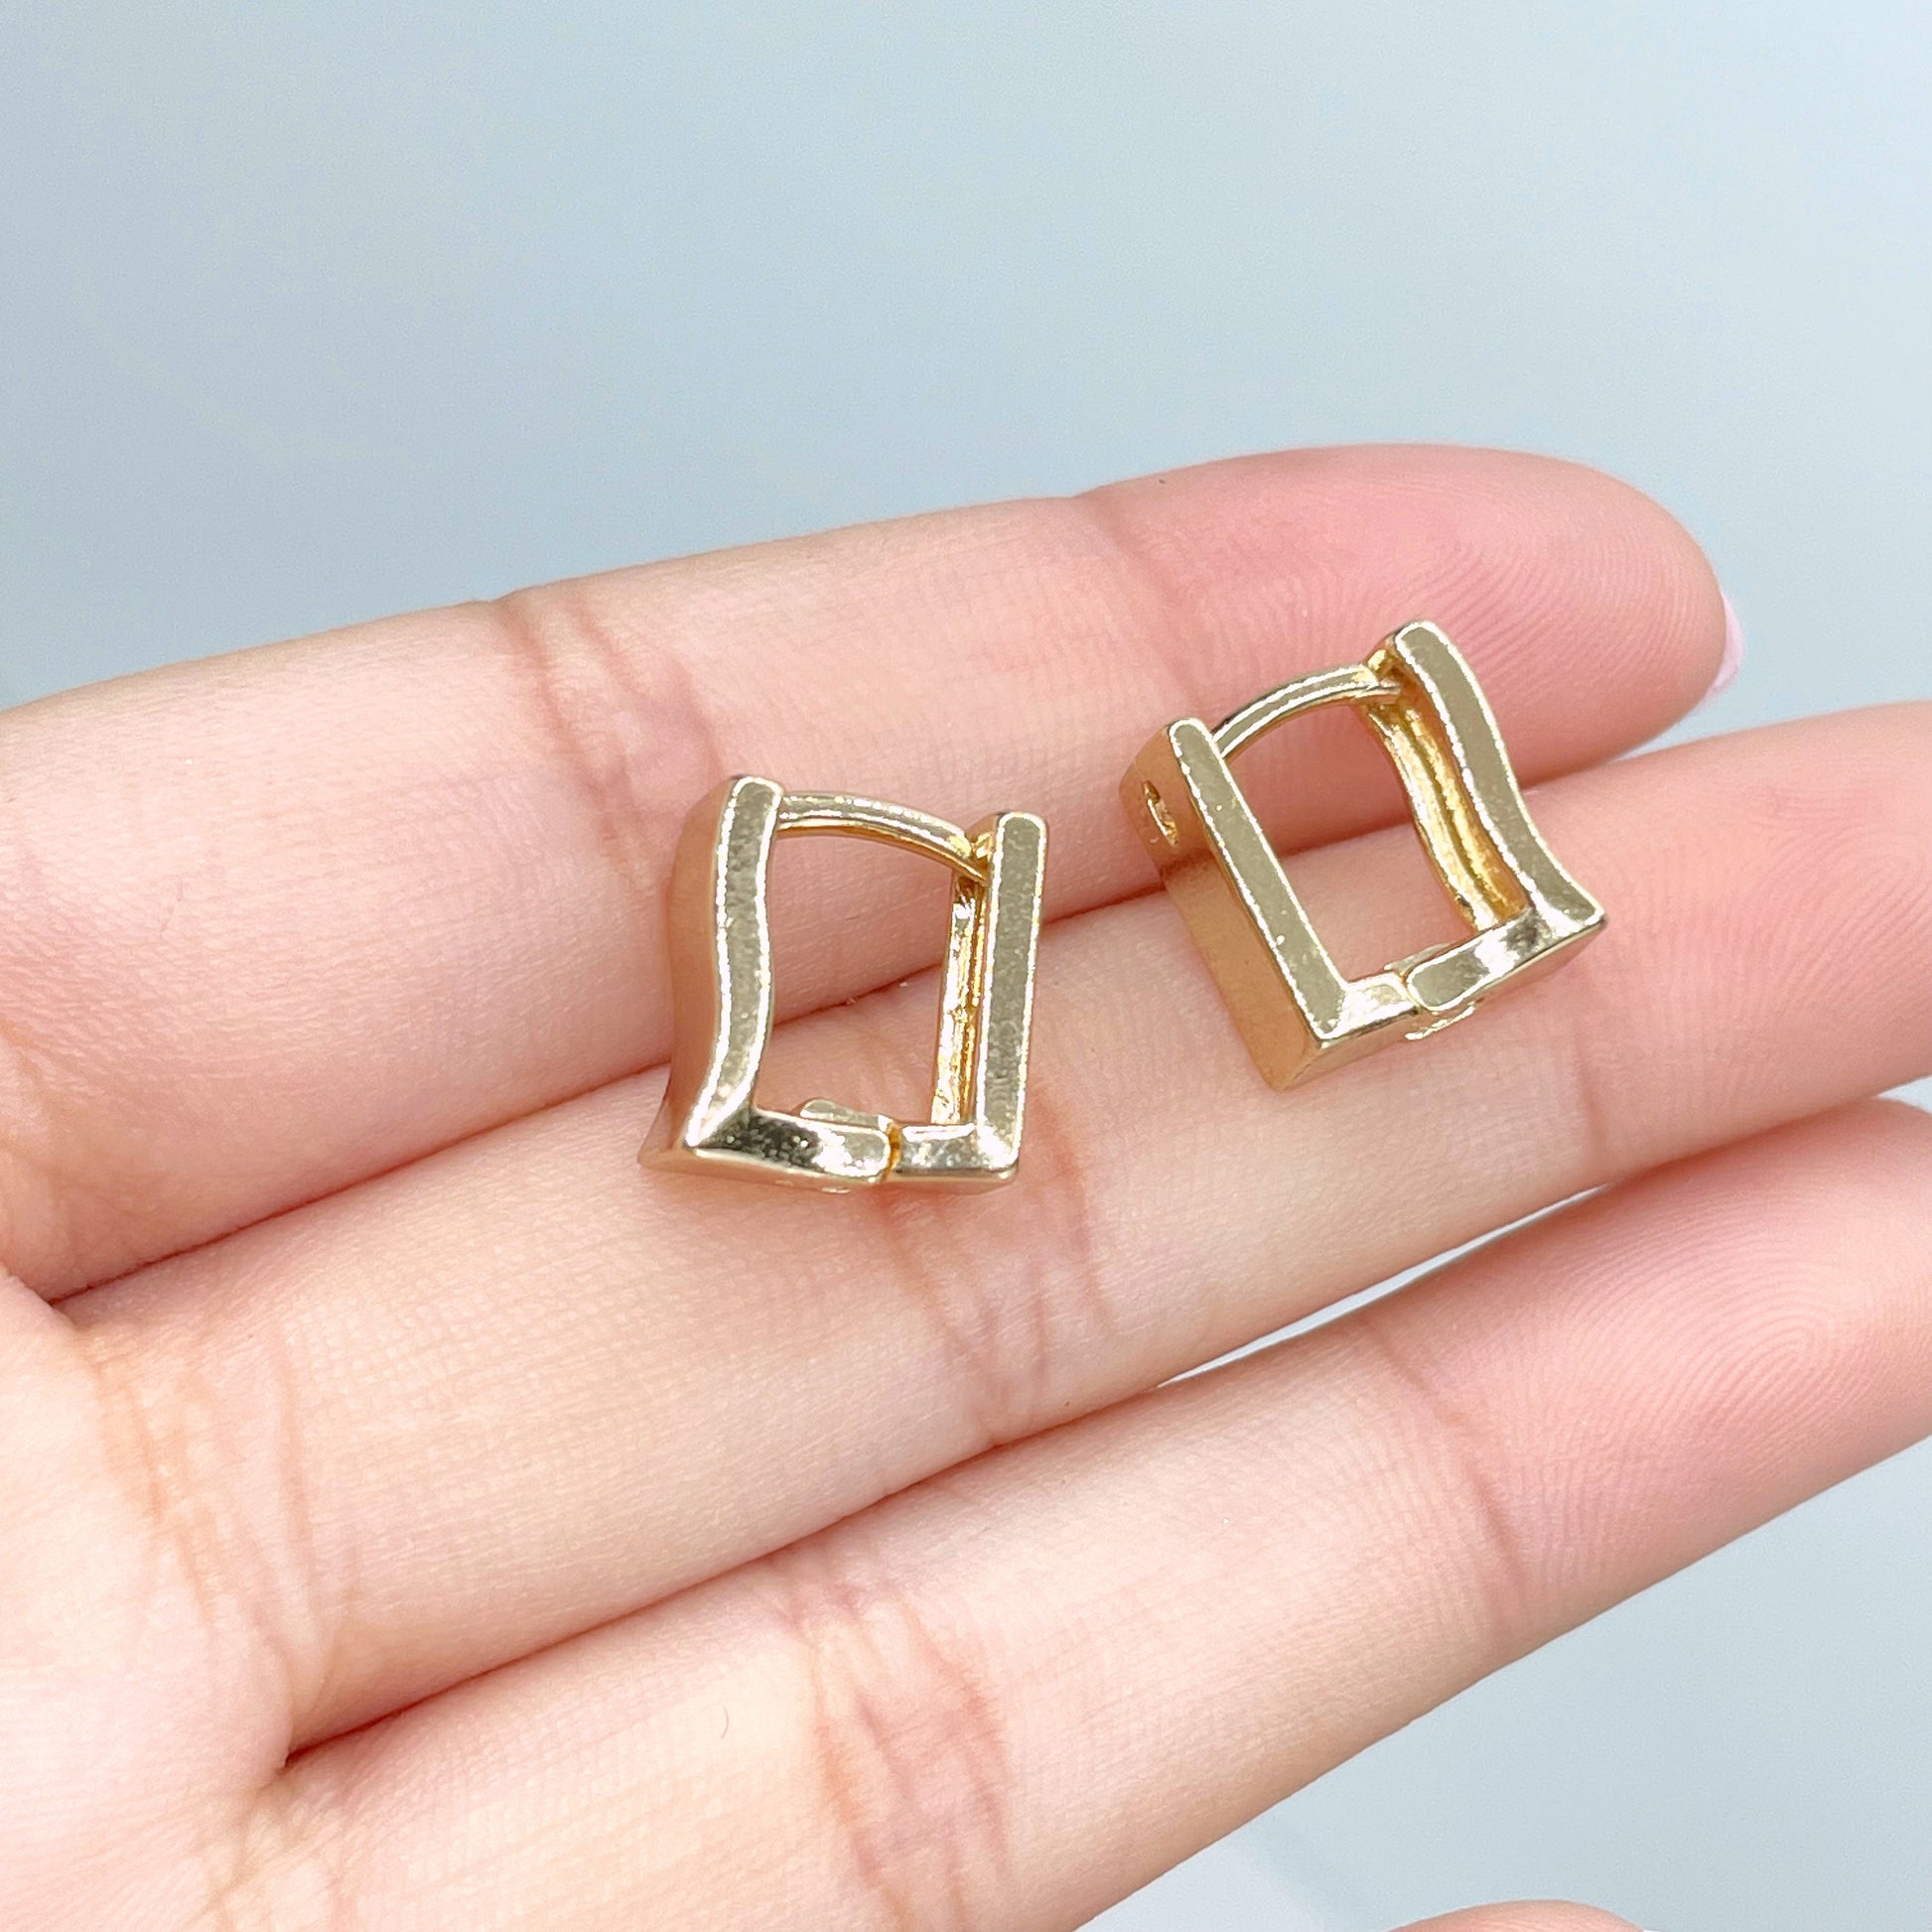 18k Gold Filled Square Shape 10mm Huggie Earrings, 6mm Thickness, Minimalist Design, Wholesale Jewelry Making Supplies